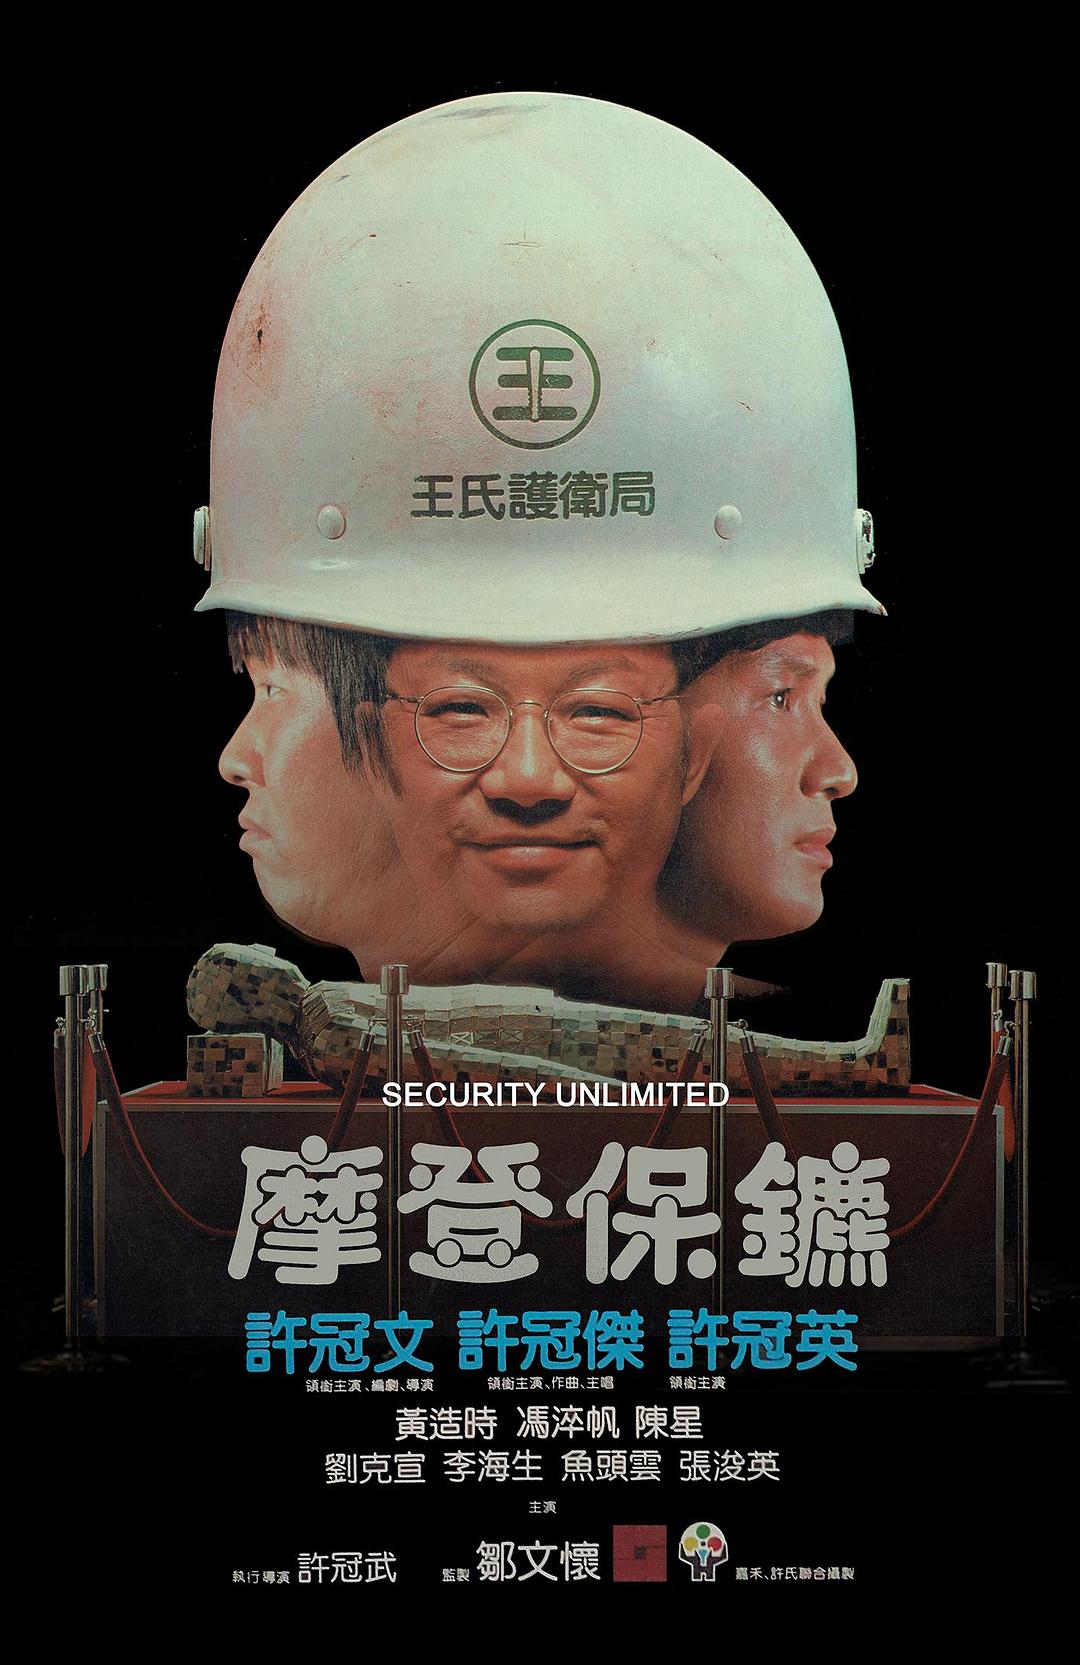 ĦǱs Security.Unlimited.1981.CHINESE.1080p.BluRay.REMUX.AVC.DTS-HD.MA.7.1-FGT 19-1.png